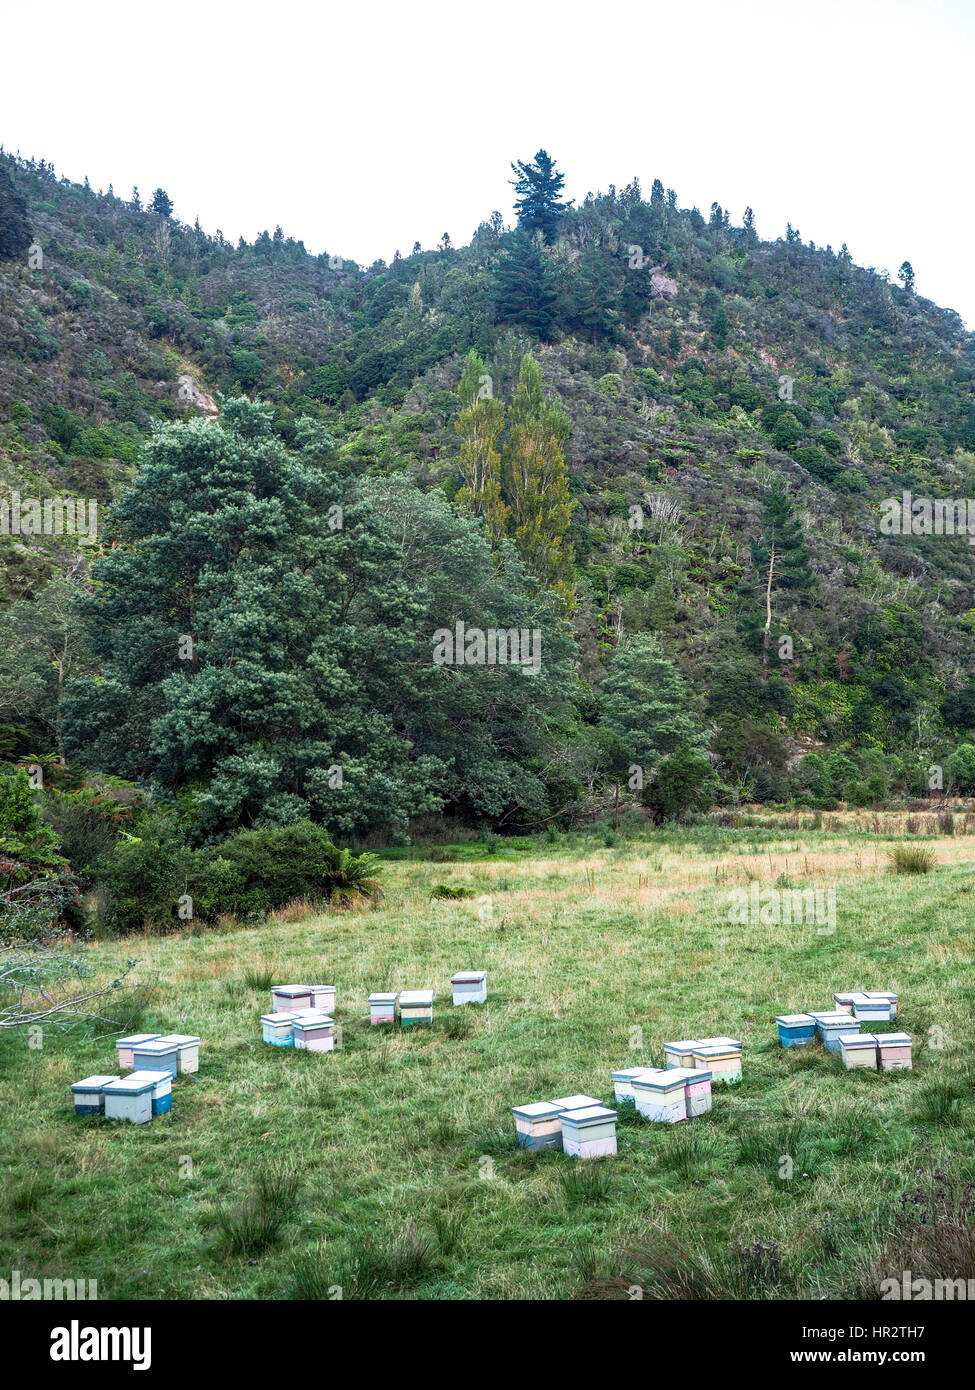 Beehives in apiary,  harvesting manuka honey from shrub lands  regenerating forest on steep hills, cleared to make grass farms, reverting to forest Stock Photo